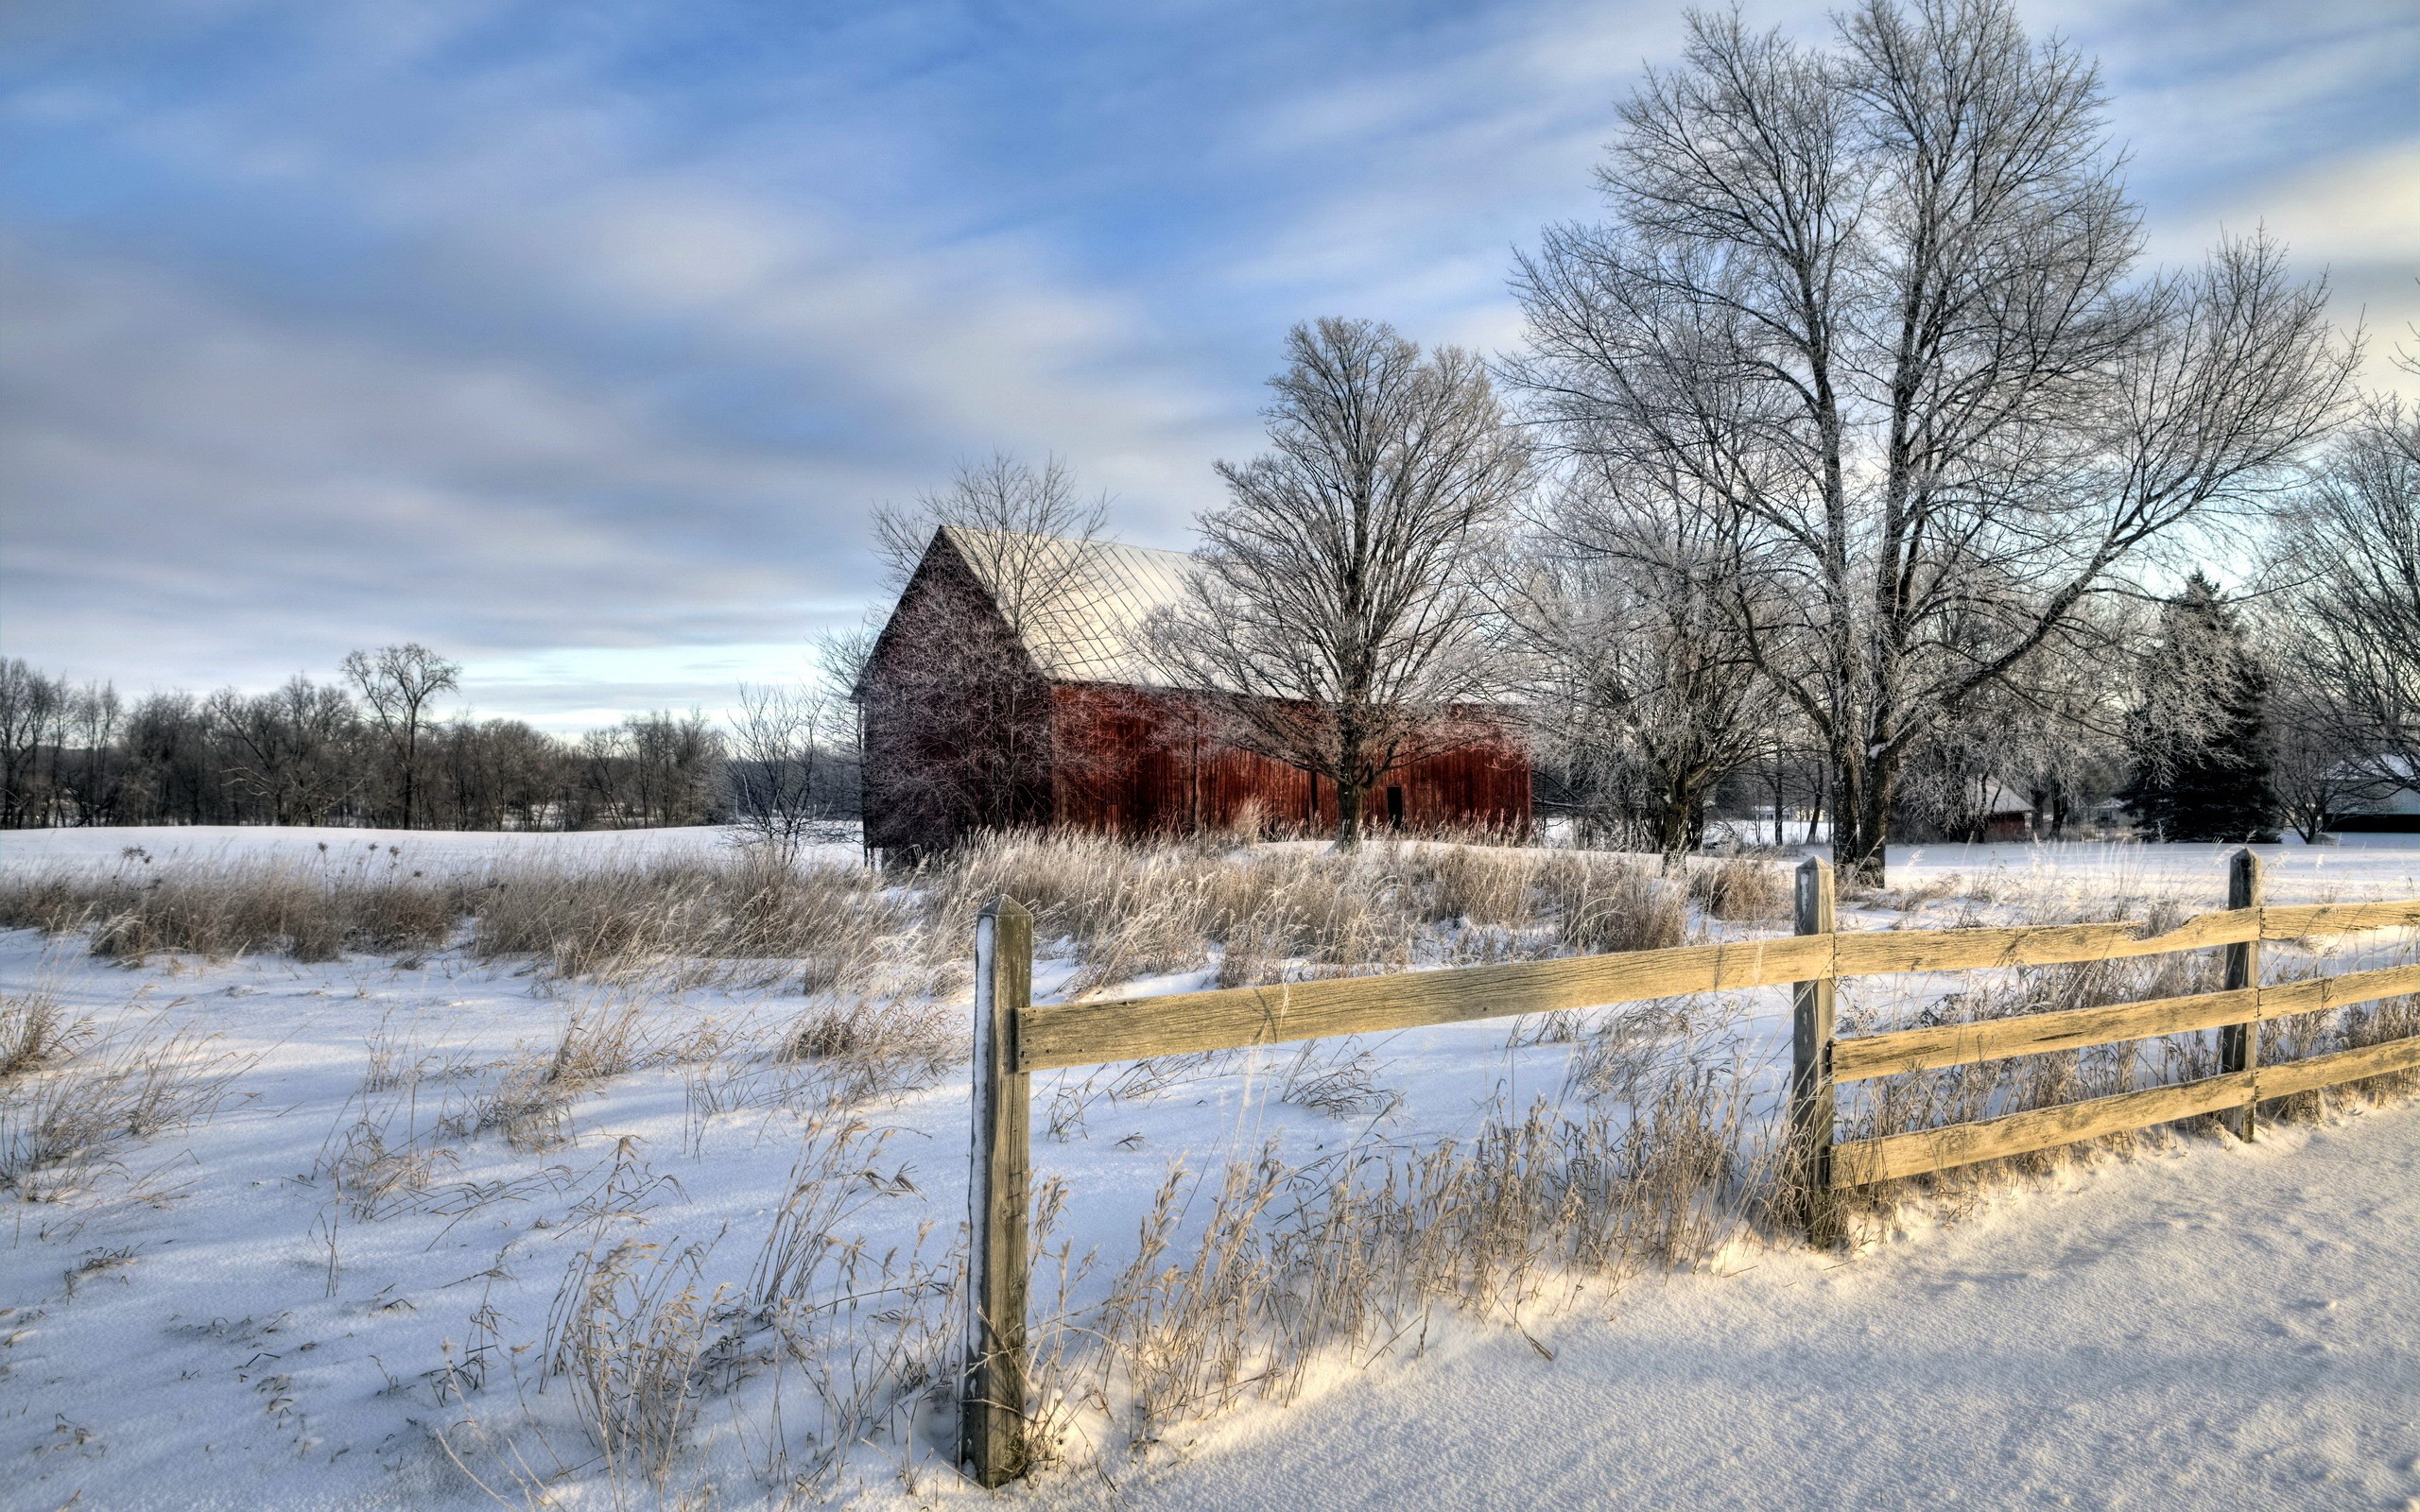 General 2560x1600 HDR barns winter cold landscape ice snow